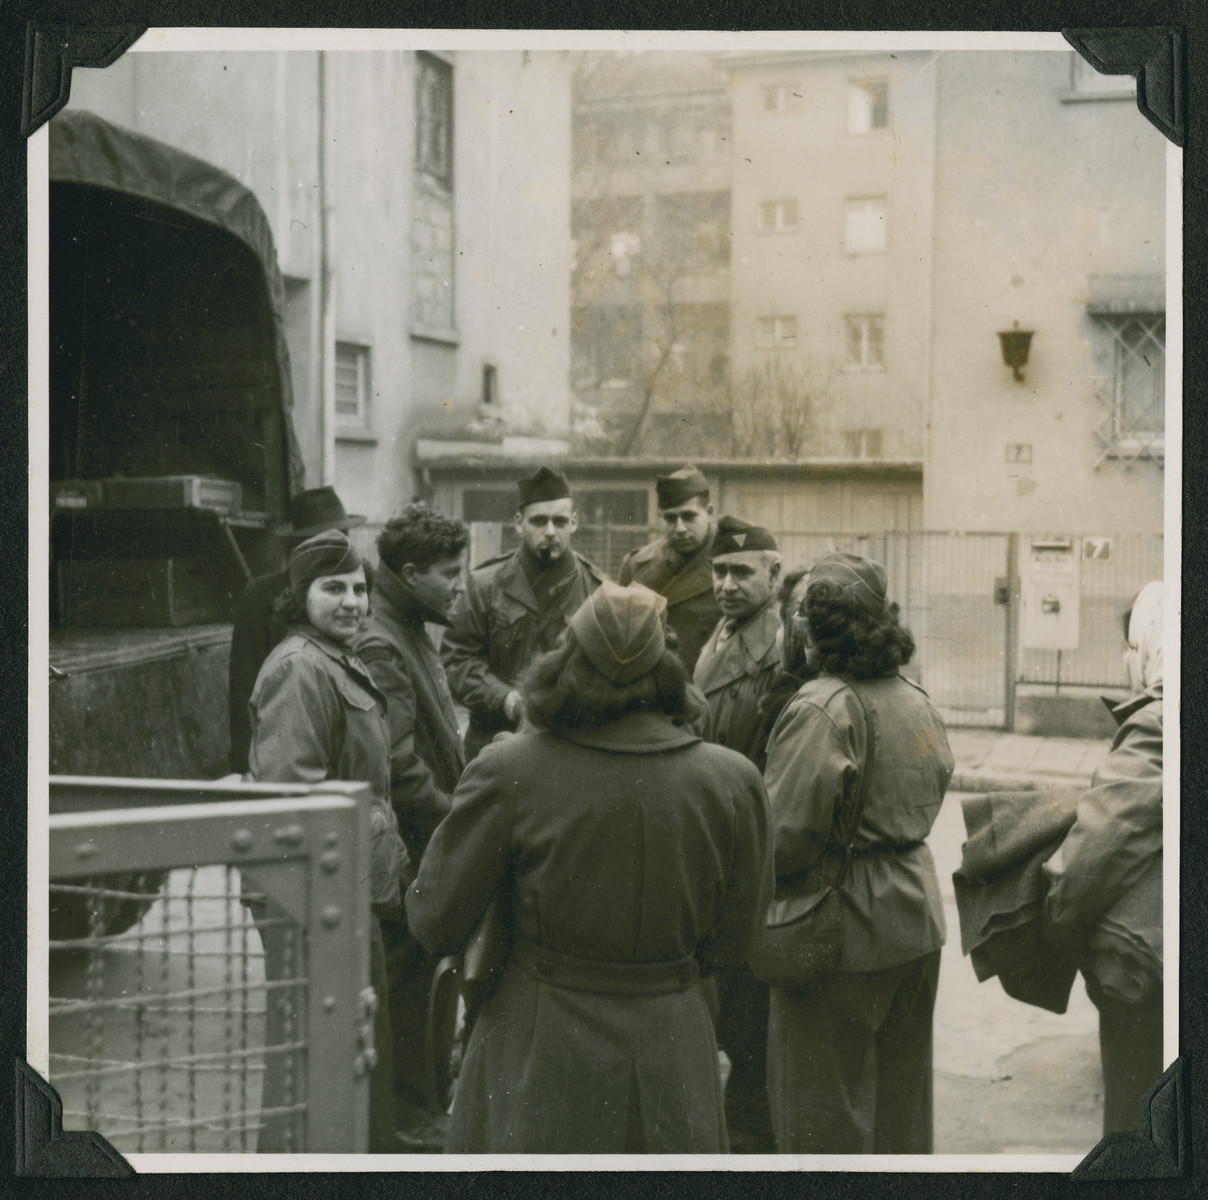 Members of the Frankfurt Jewish GI Council prepare to load supplies onto a truck to take to needy displaced persons in Babenhausen.

Maurice Levitt is standing in the center on the left facing the camera.  Yehuda Lev is second from the left.